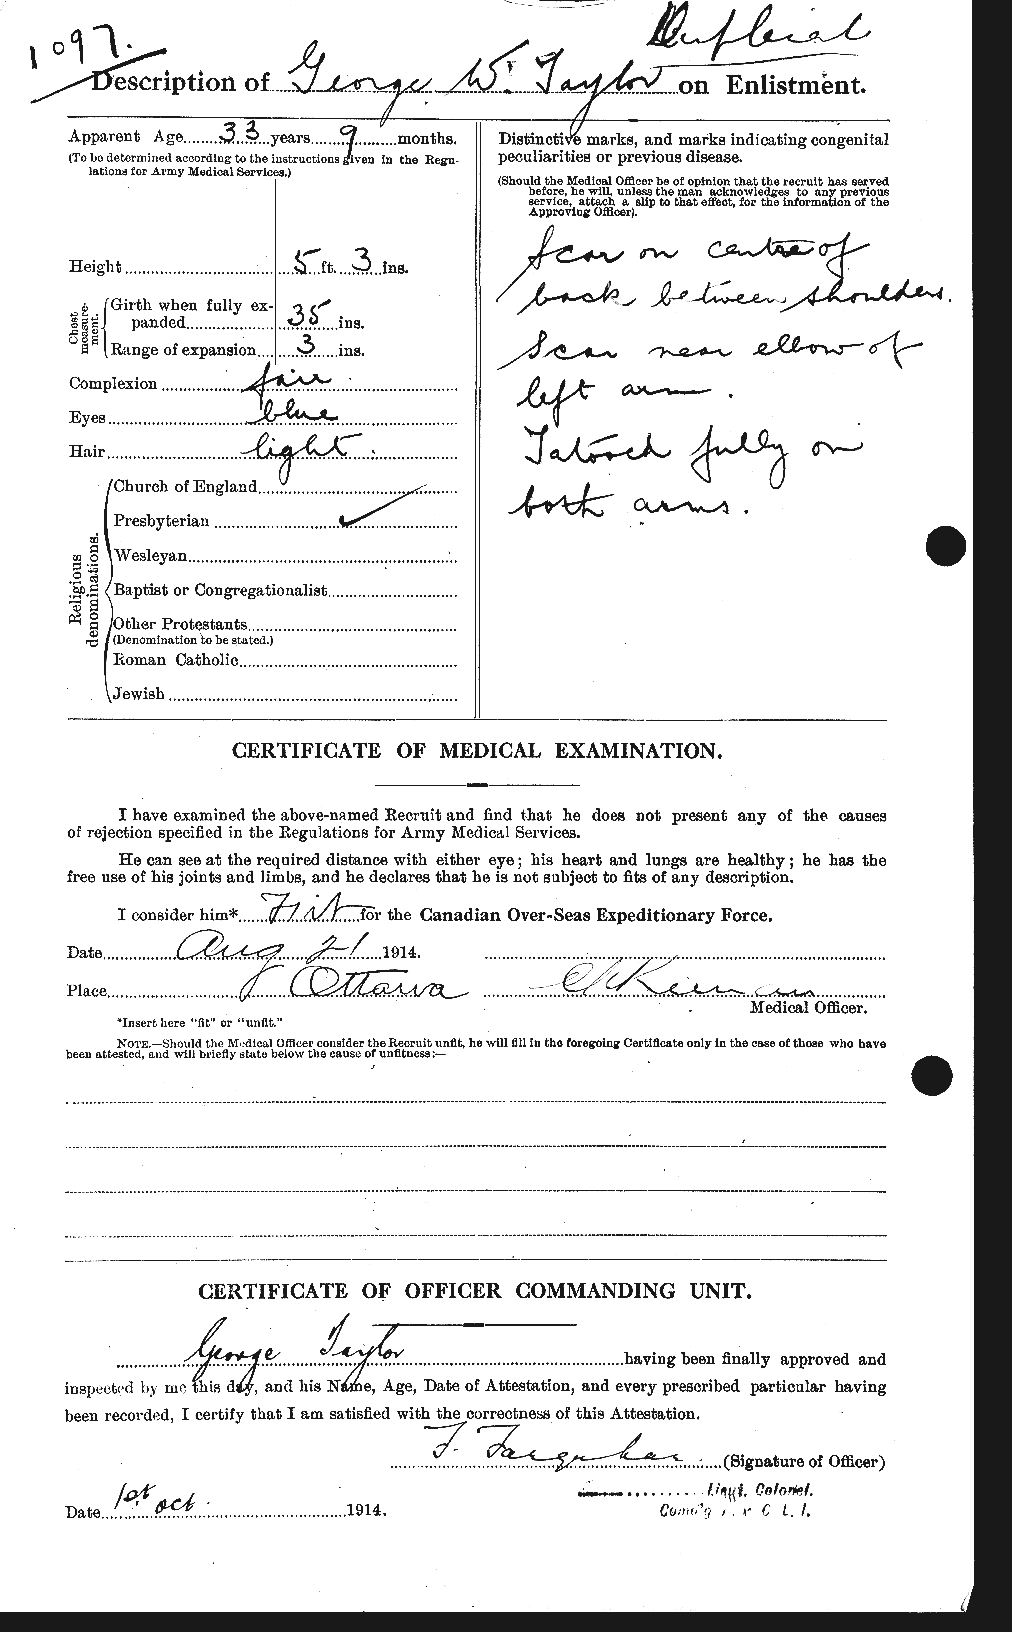 Personnel Records of the First World War - CEF 626362b